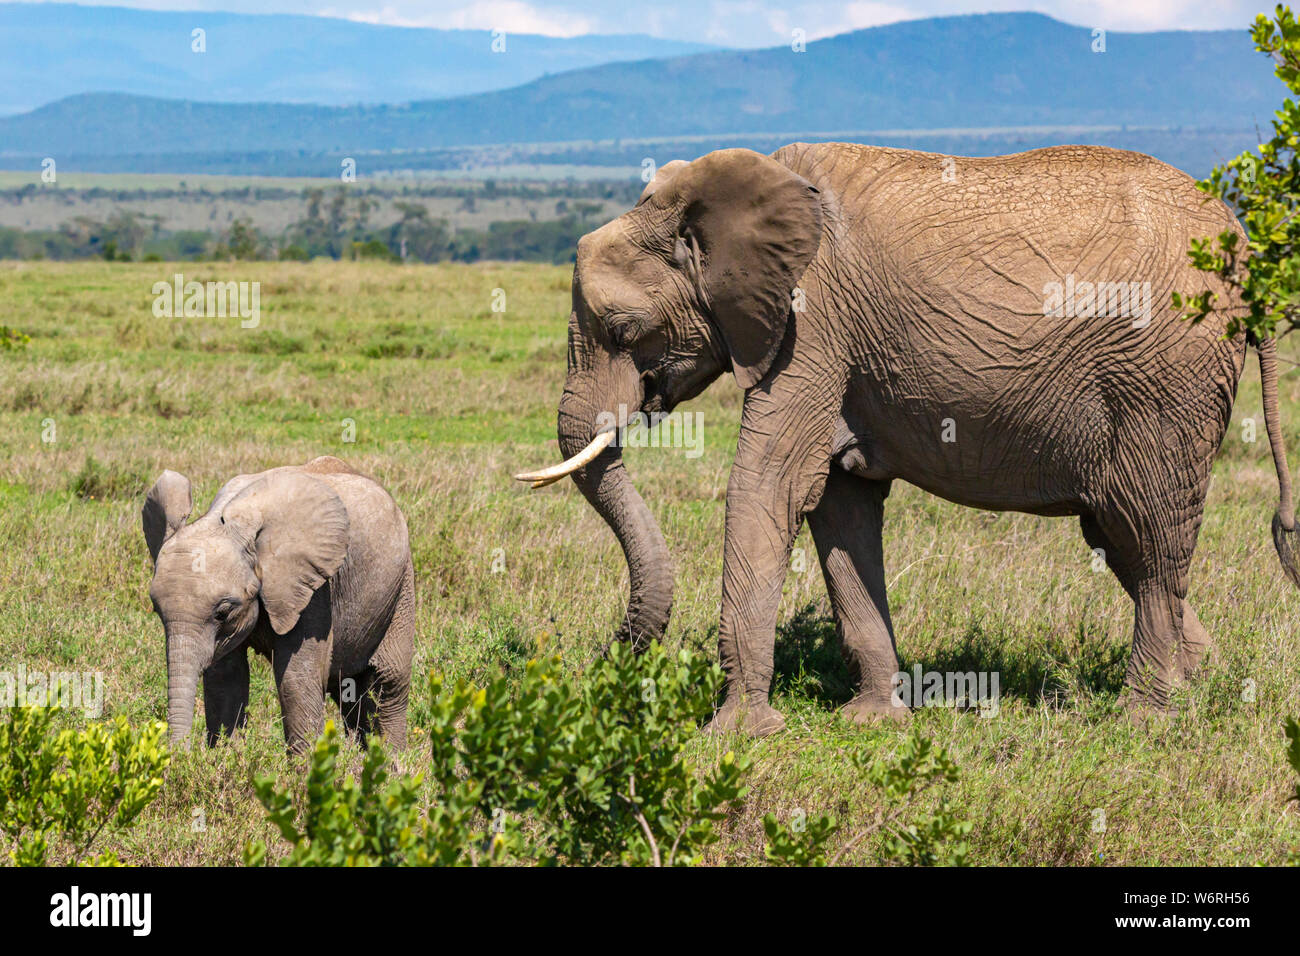 Colour wildlife portrait of two Elephant (Mum and calf) standing within scrub and grassland on hot sunny day in landscape orientation, taken in Kenya. Stock Photo